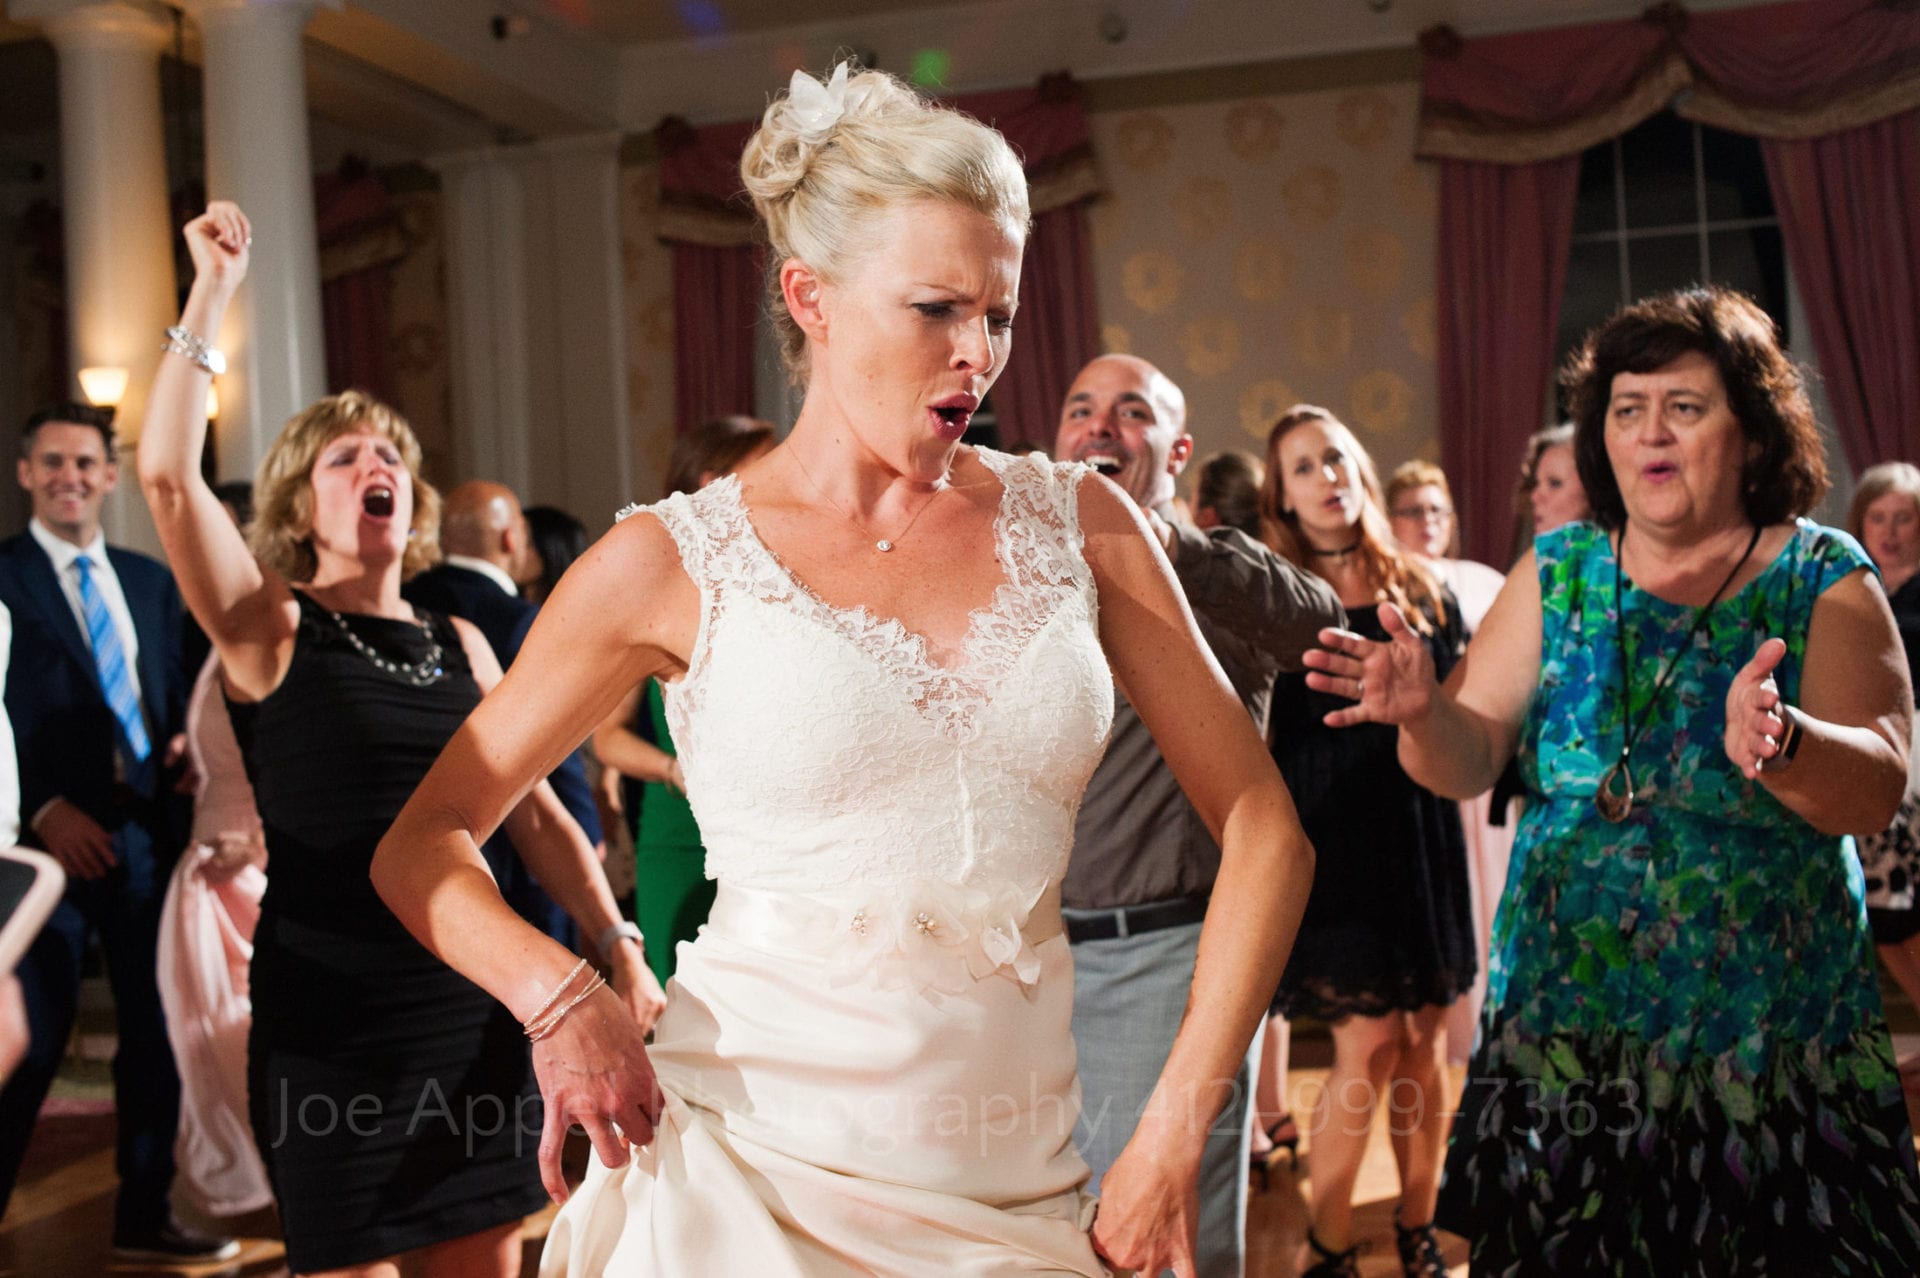 A bride hitches up her dress at her hips as she dances in front of her cheering guests during their Omni Bedford Springs Resort Wedding.